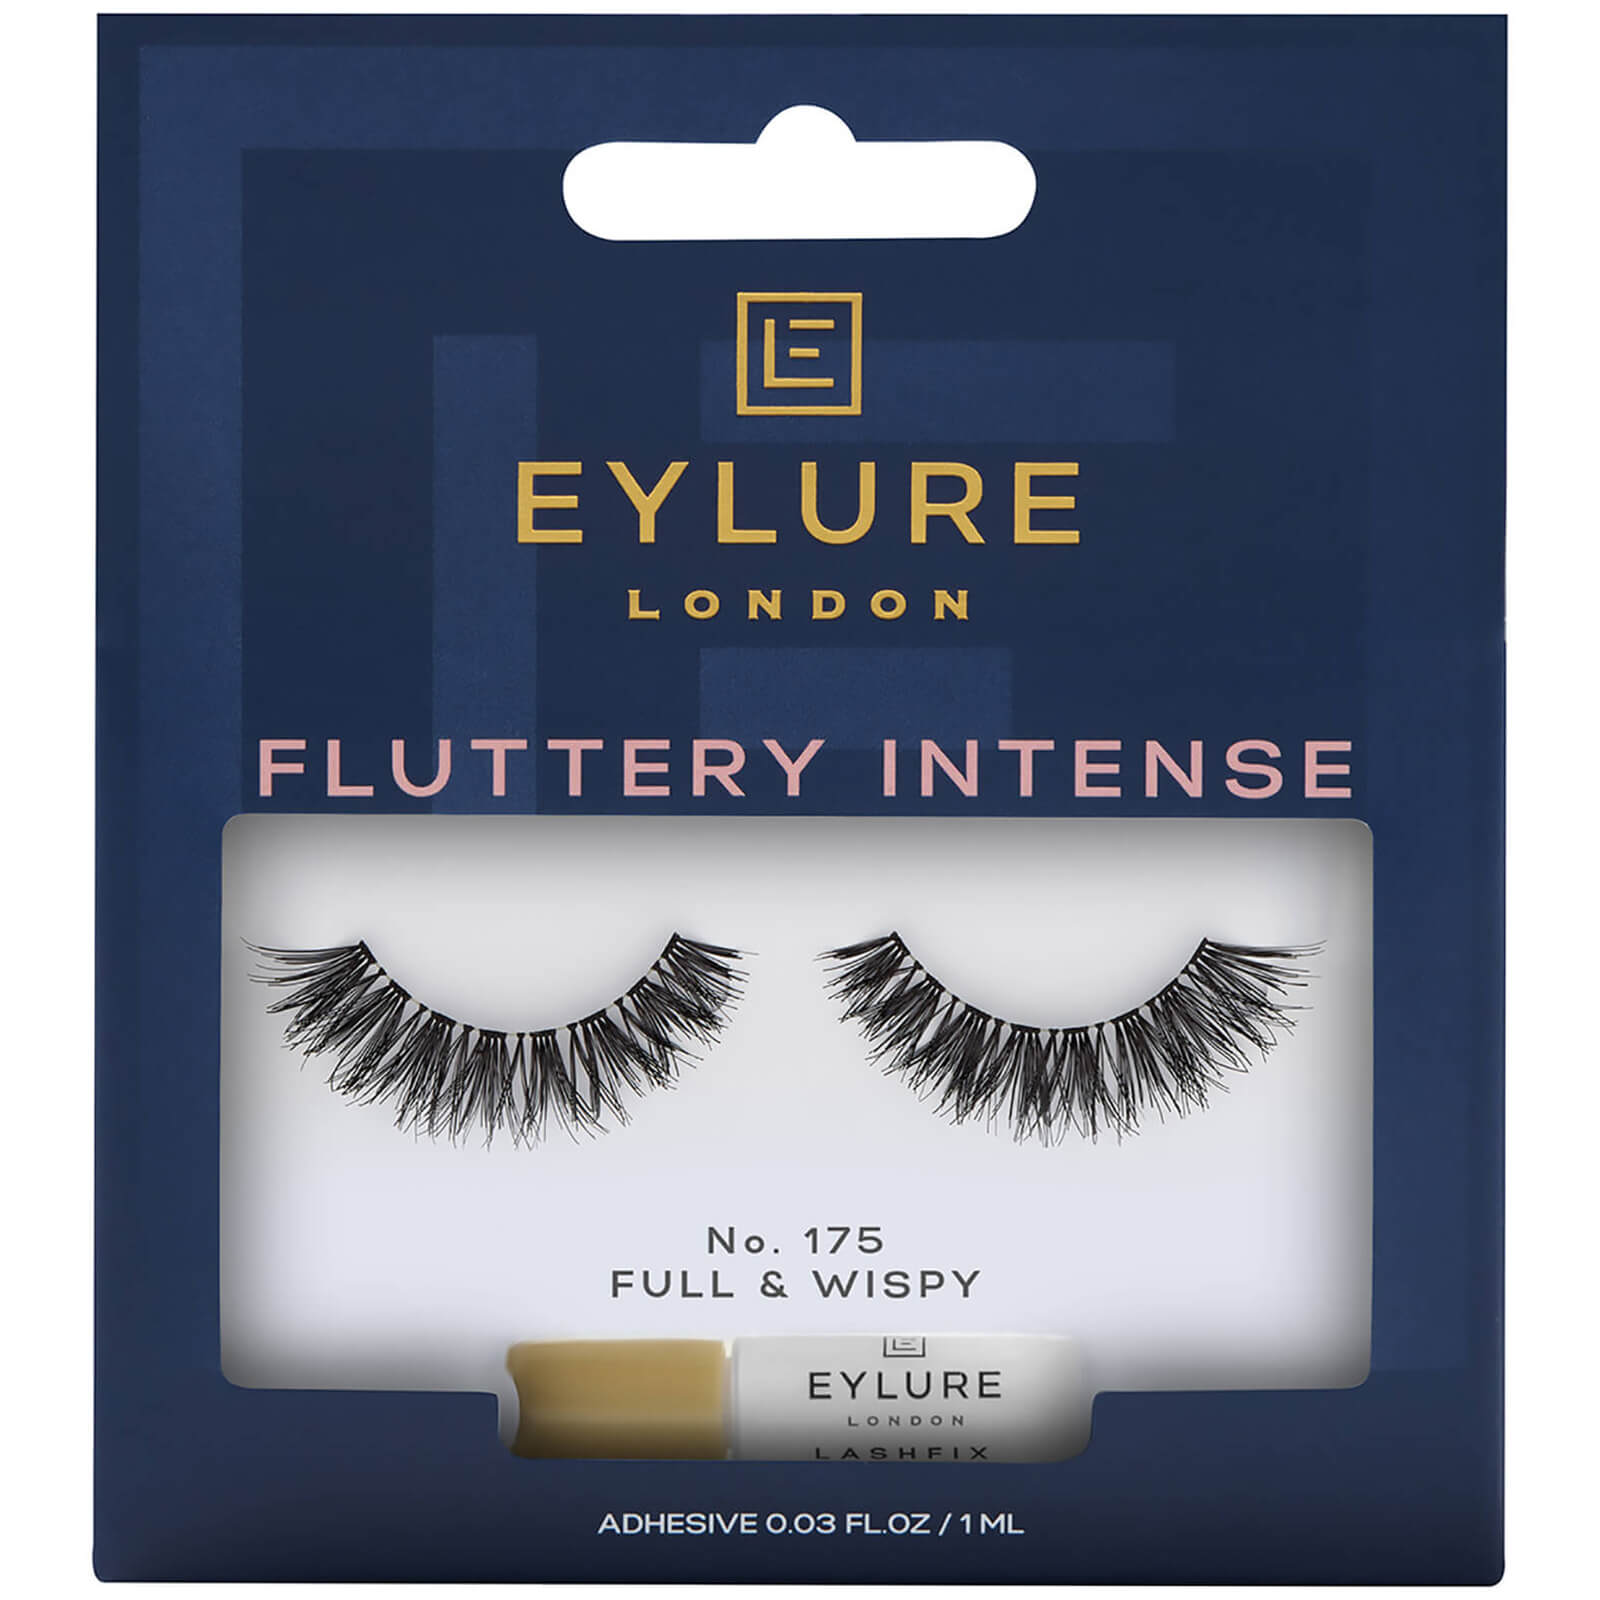 Photos - Other Cosmetics Eylure False Lashes - Fluttery Intense No. 175 6001970 